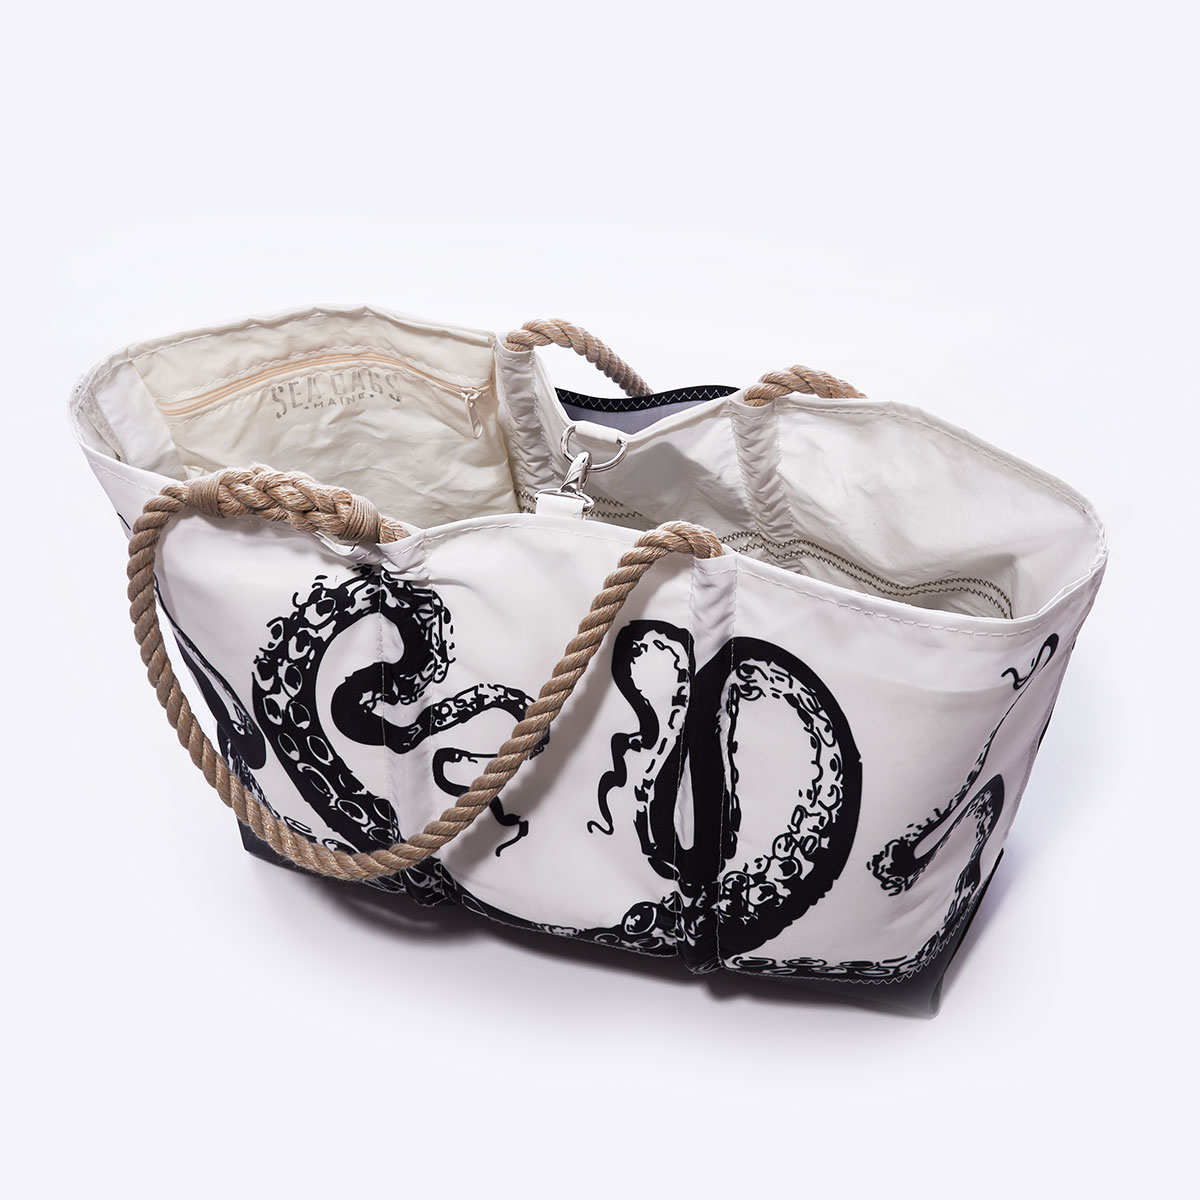 clasp closure: black legs of an octopus reach up to the top of this recycled sail cloth tote, with a solid black along the bottom, and hemp rope handles